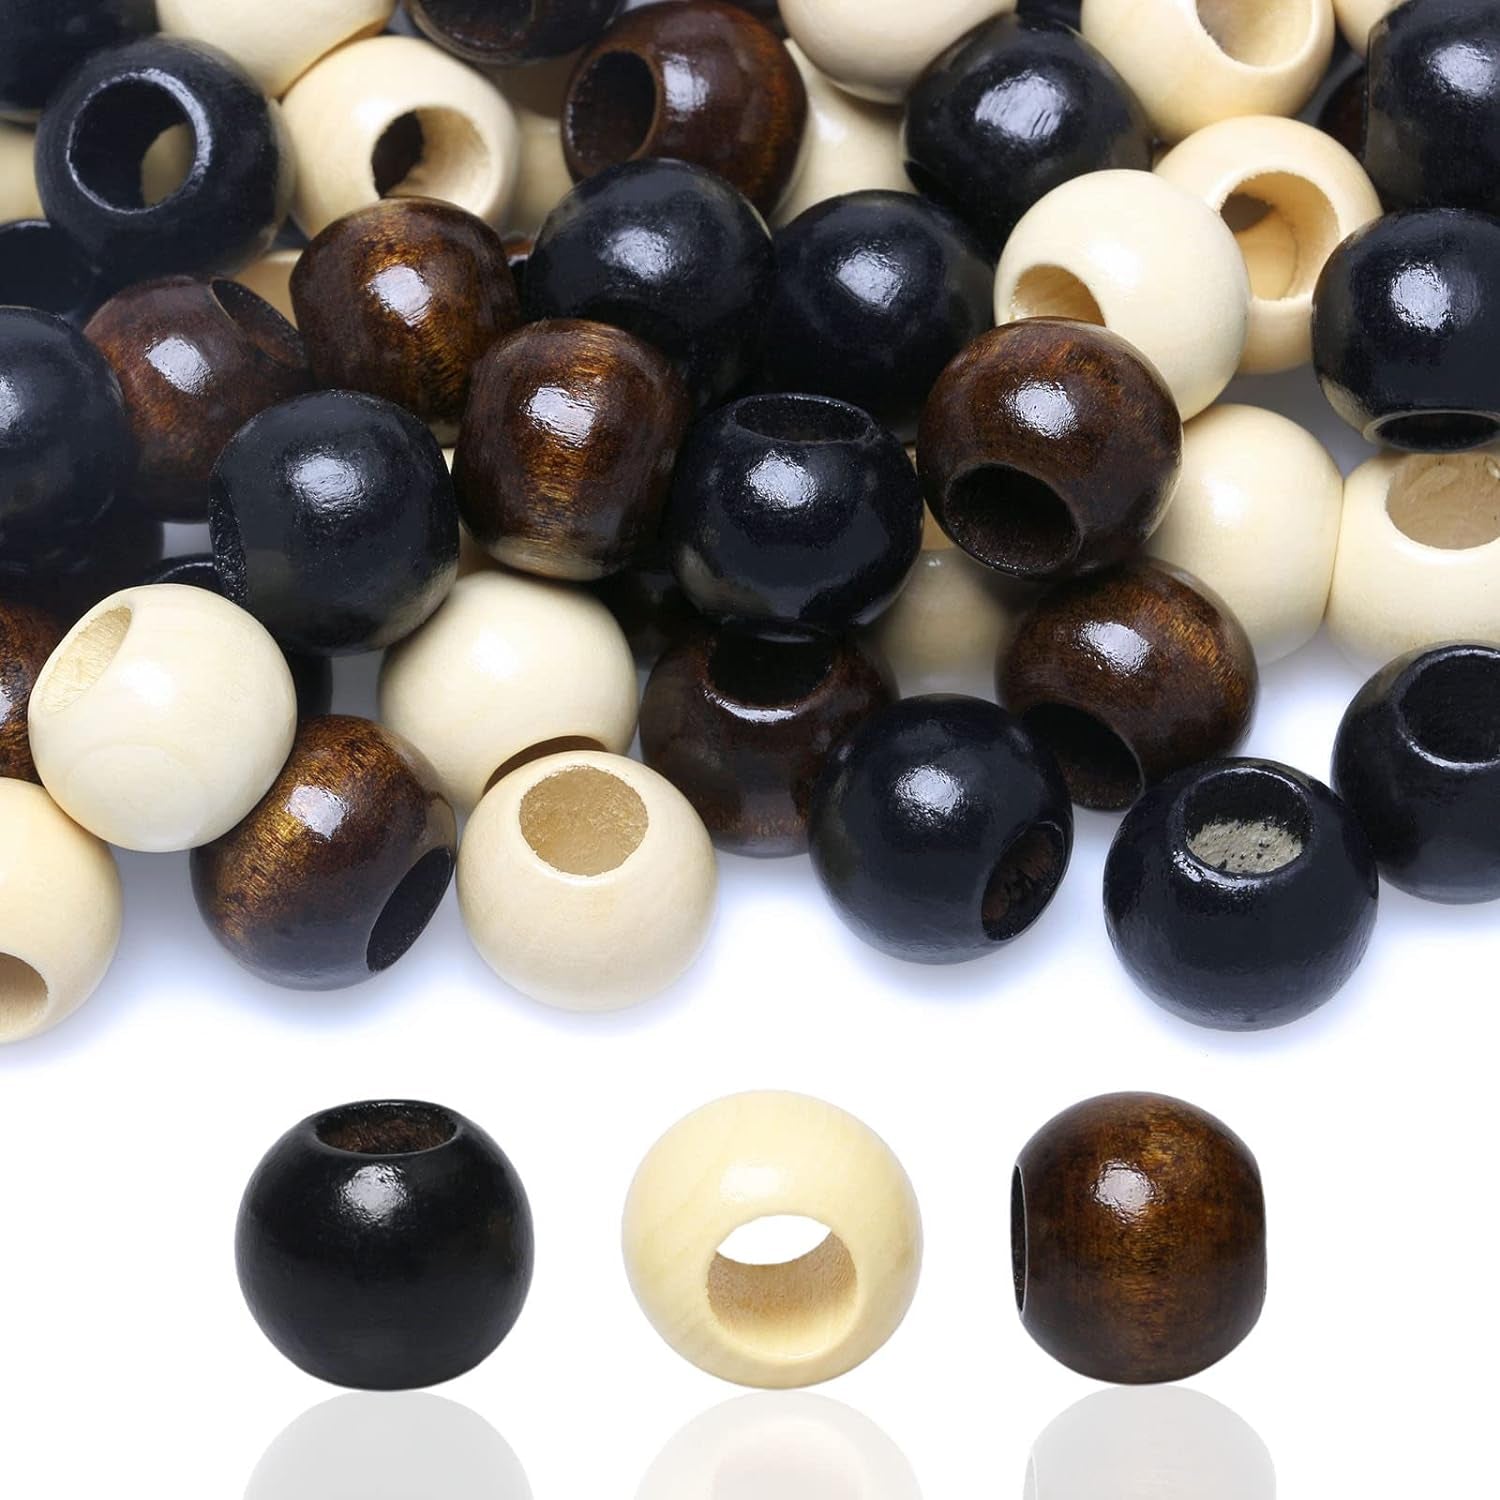 150 Pieces 20Mm Wood Beads Large Hole Macrame Wooden Beads Variety Pack, Colored Wooden round Beads for Craft/Garlands/Home Party Decor, 9Mm Hole (Brown/Black/Blue)